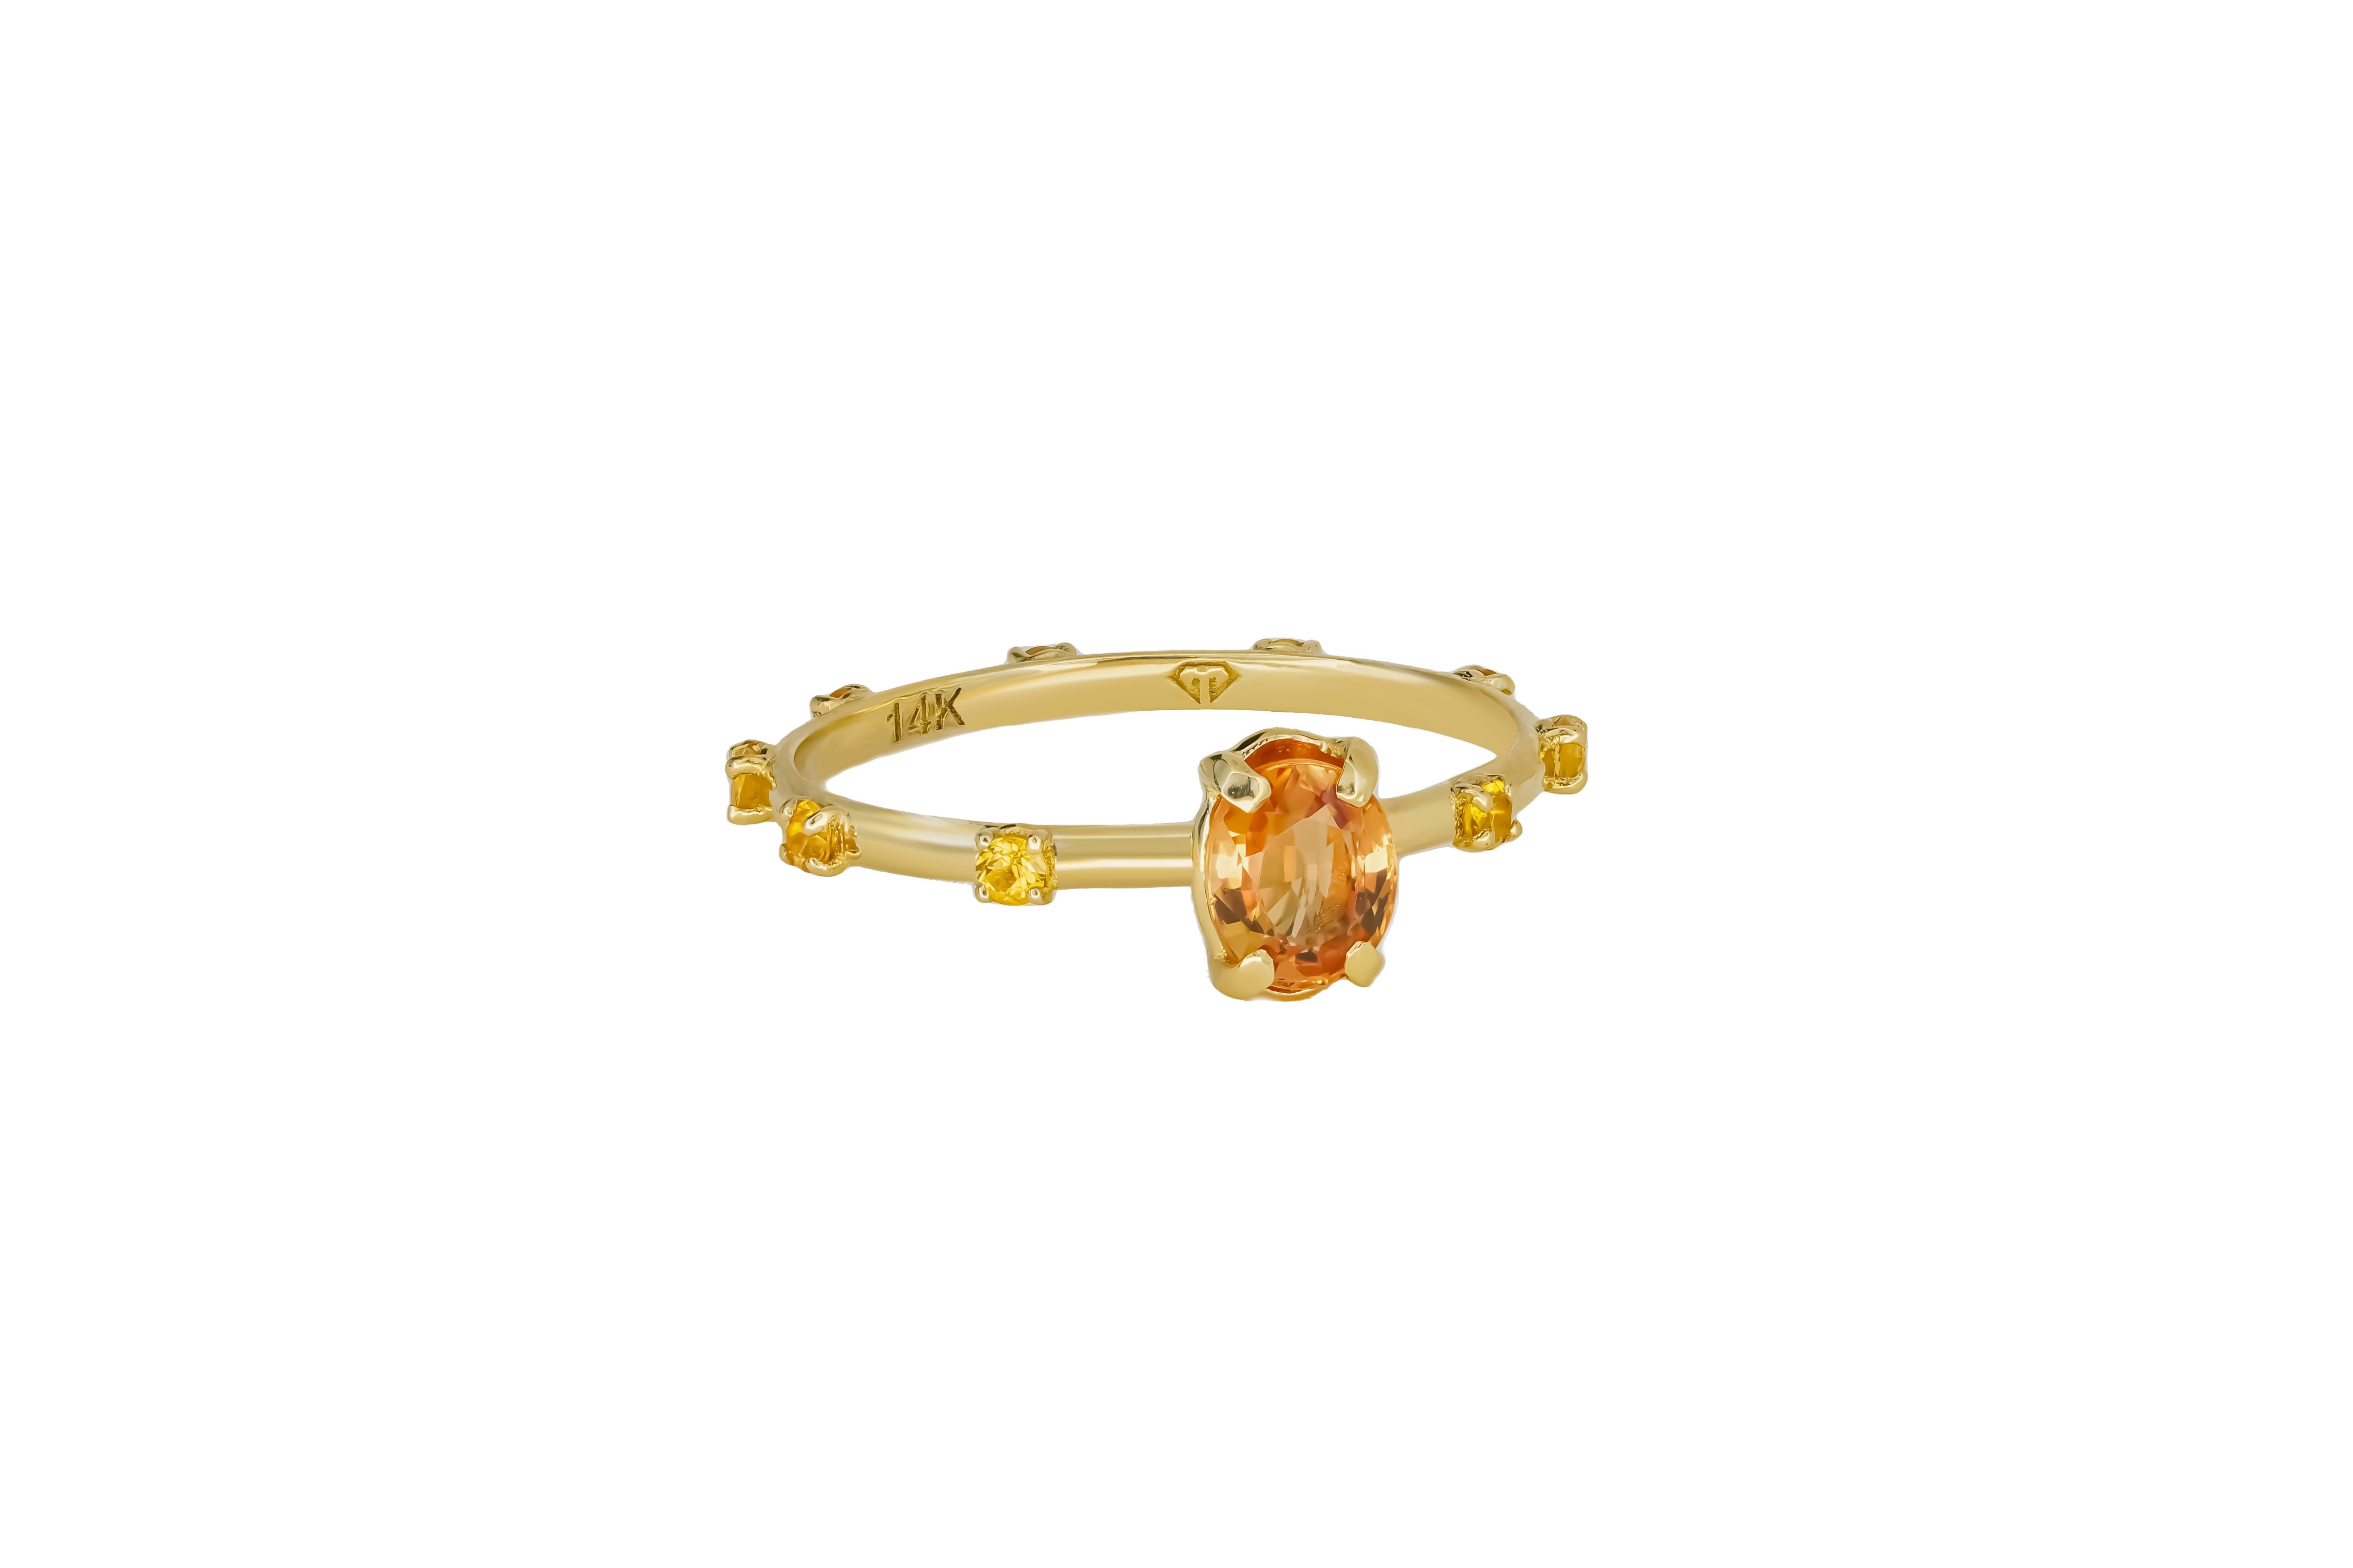 Lab Sapphire 14k gold ring. Oval Sapphire ring.  Yellow gem ring. 

Metal: 14k gold ring
Weight: 1.8 gr depends from size

Gemstones:
Lab sapphire, oval cut, 1 ct, yellow - orange color
Small yellow sapphires

auction